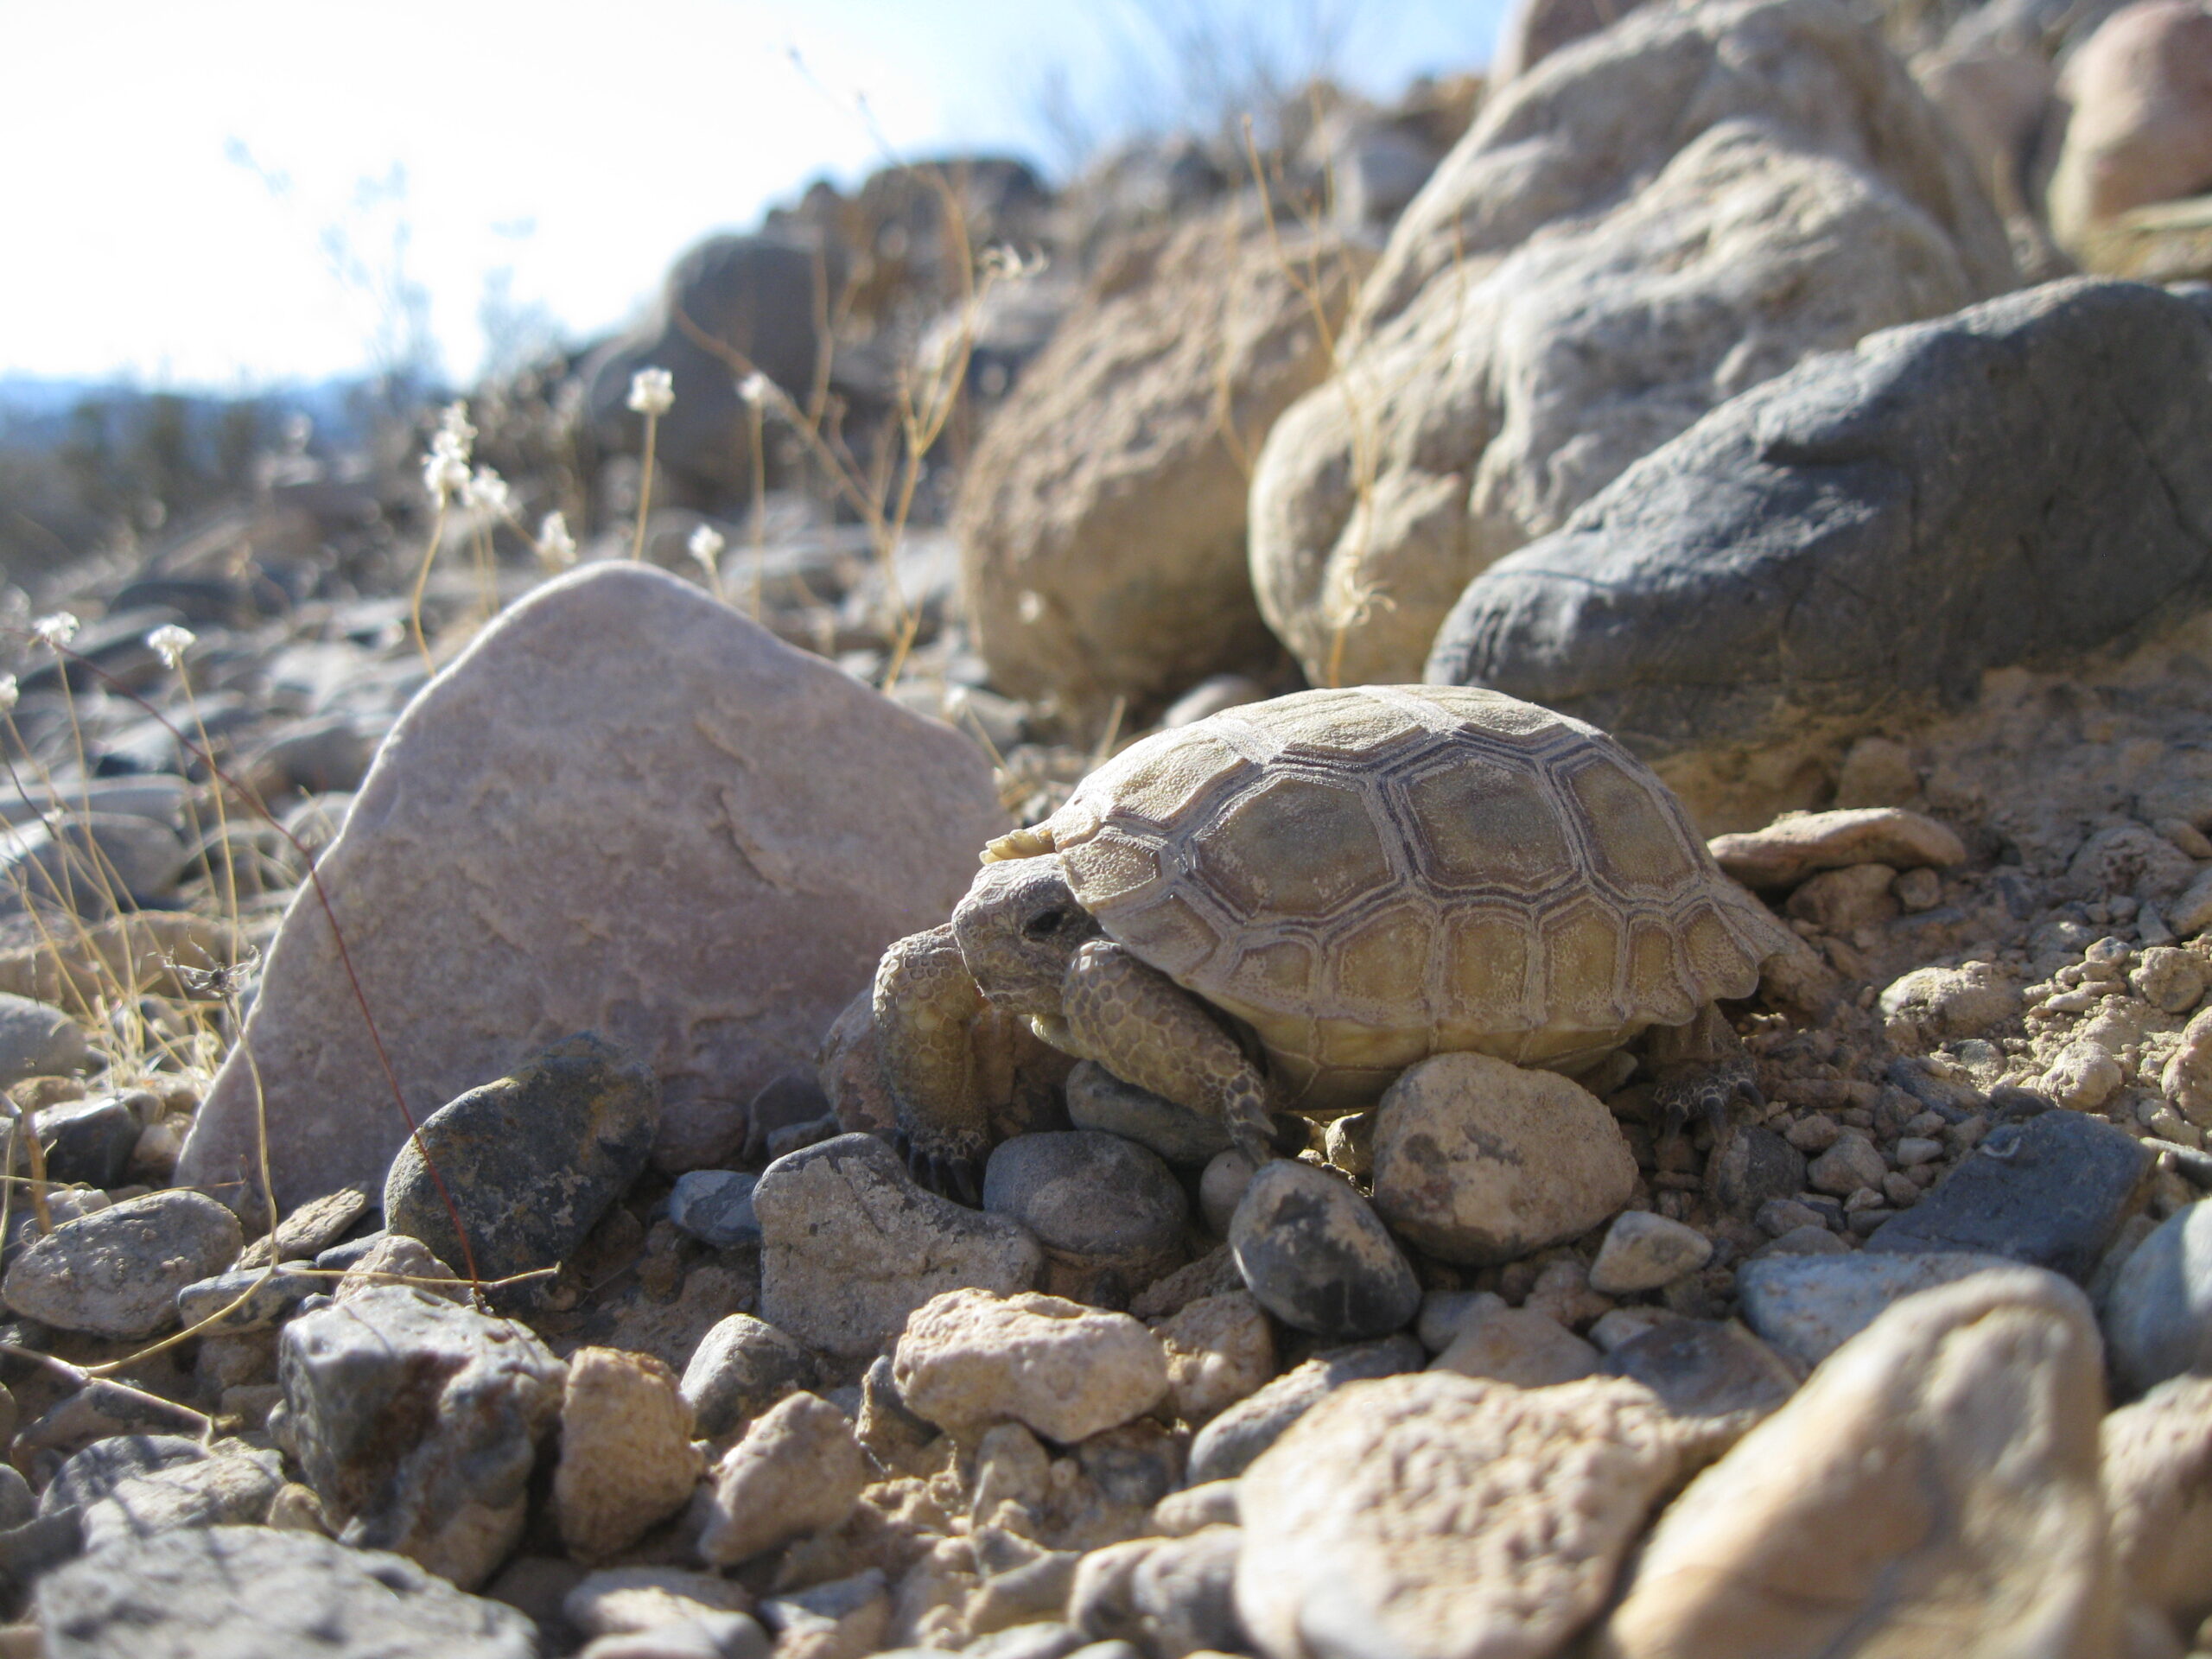 A young endangered Mojave desert tortoise sitting in the sun